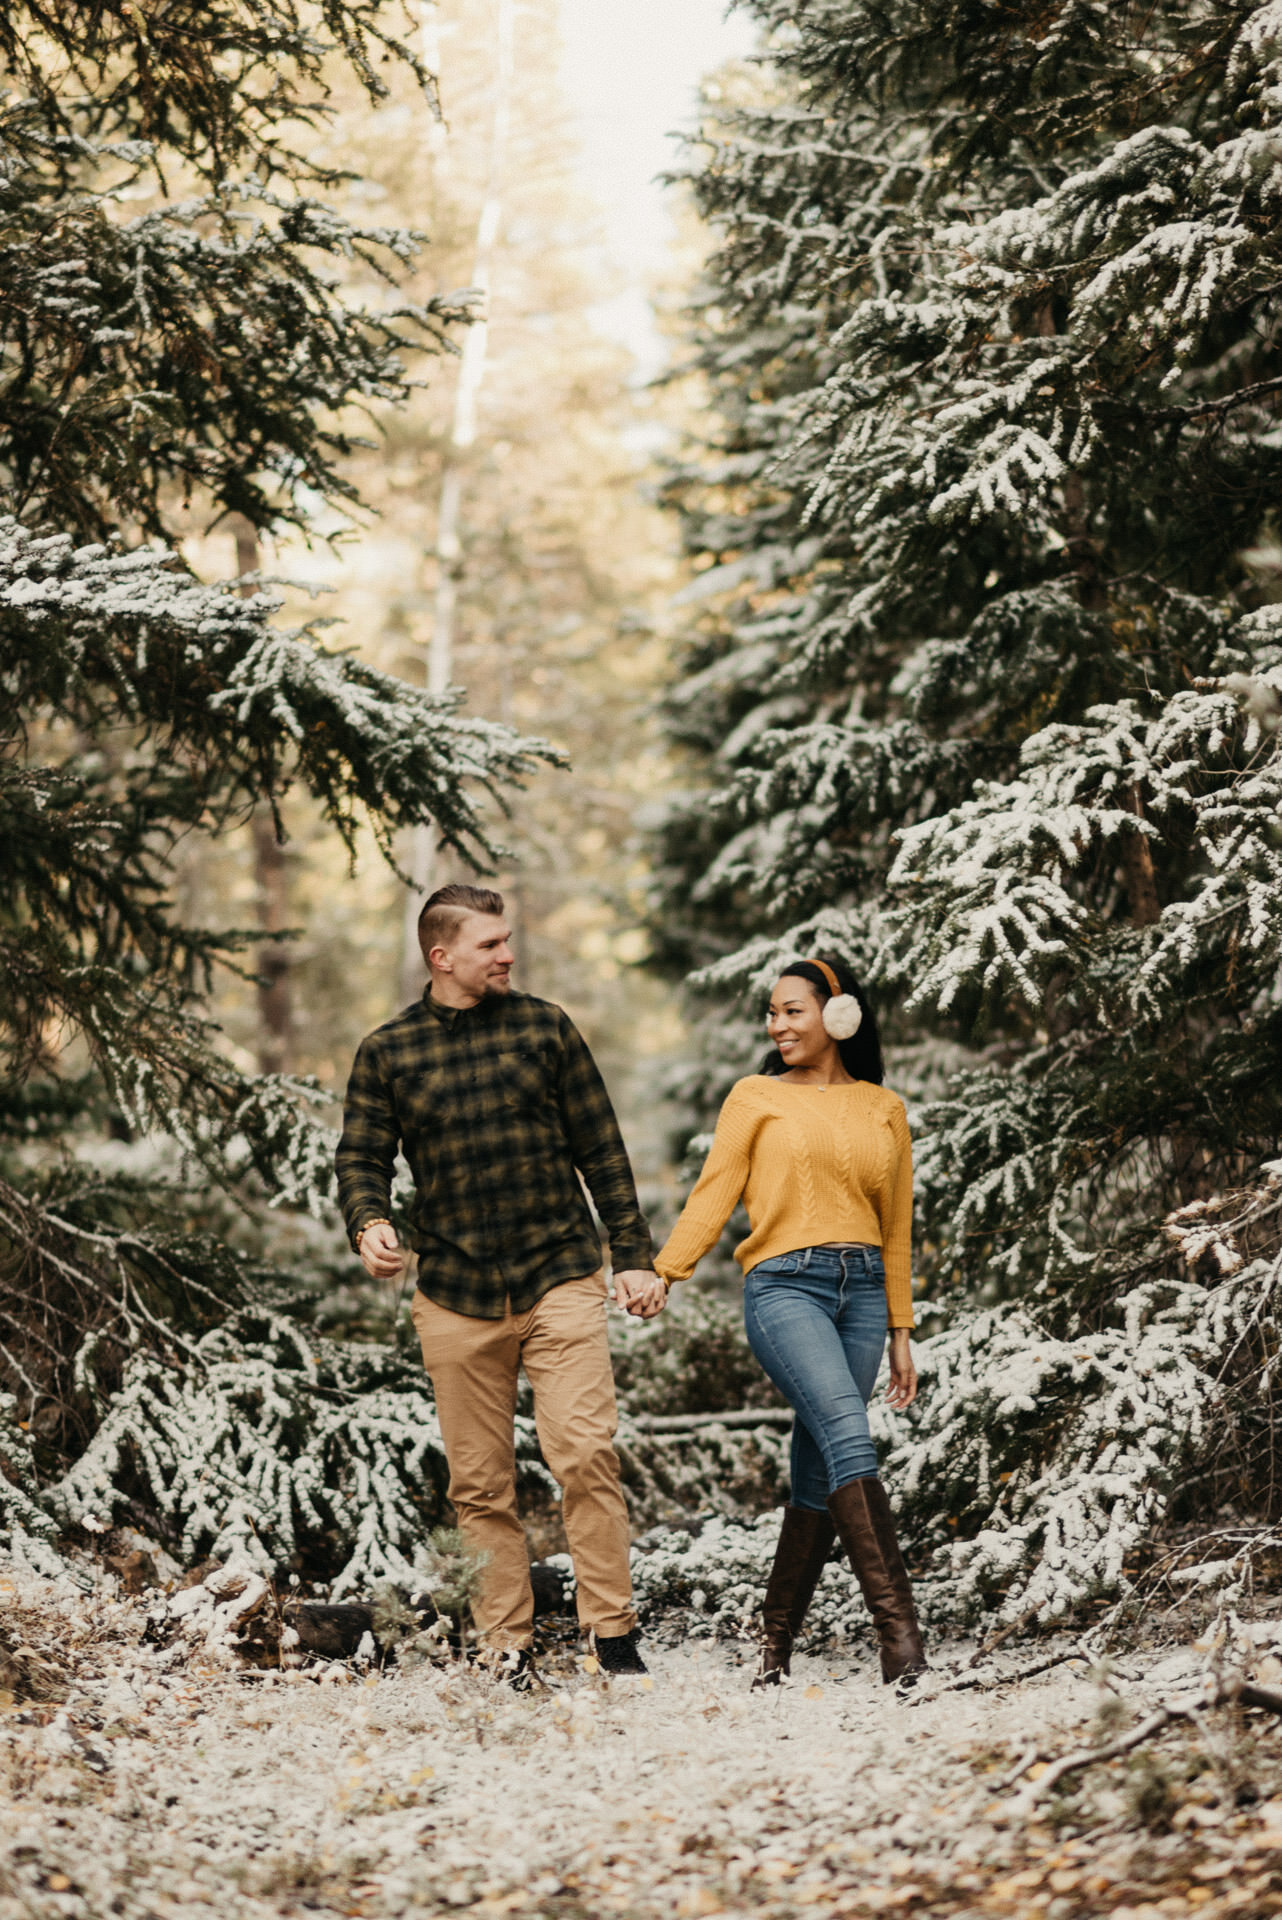 kelsey-rob-snowy-fall-leaves-evergreen-colorado-engagement-session-19.jpg